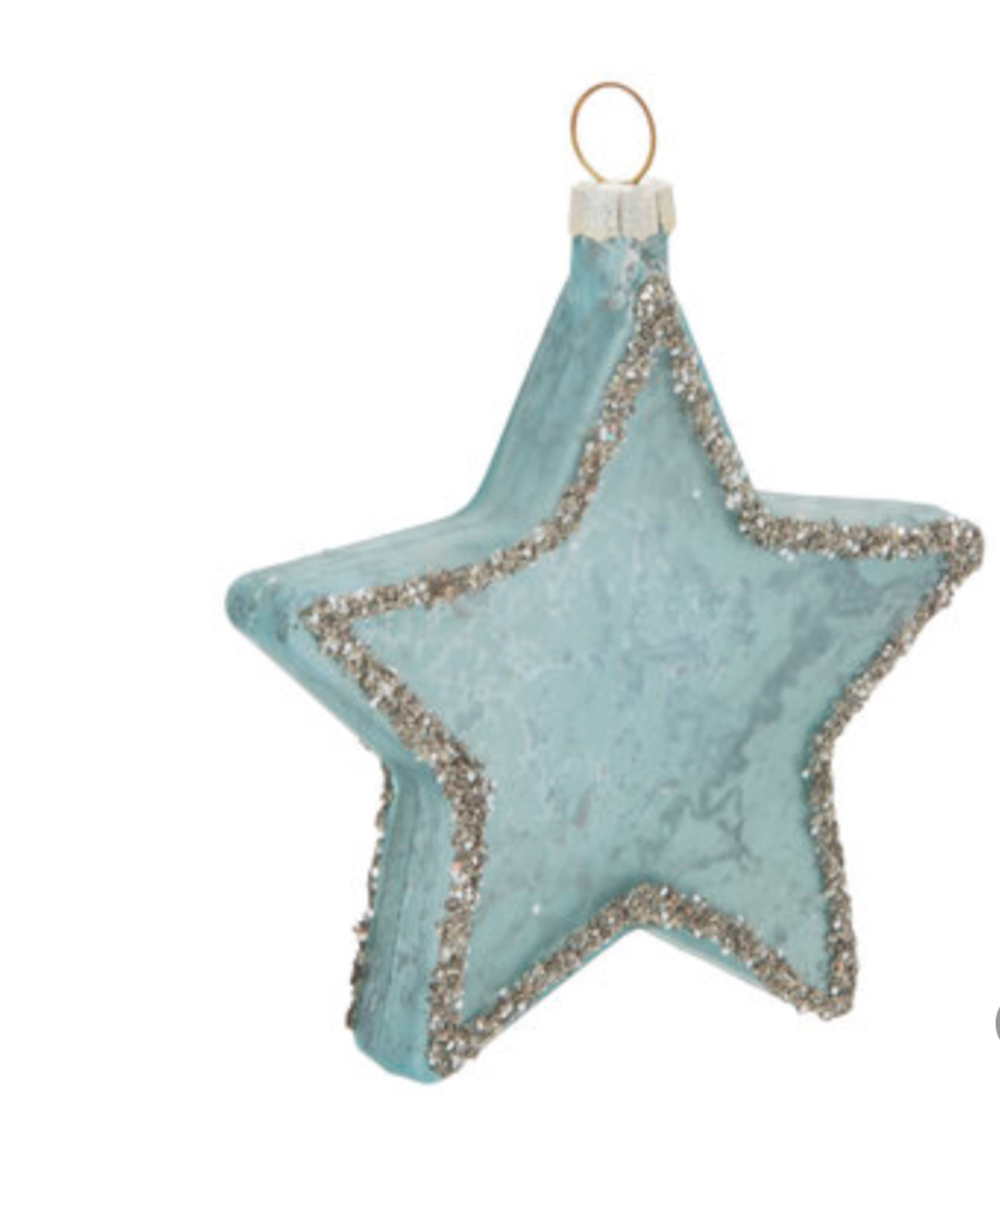 Robert Stanley Blue Glitter Star Glass Christmas Ornament New with Tag